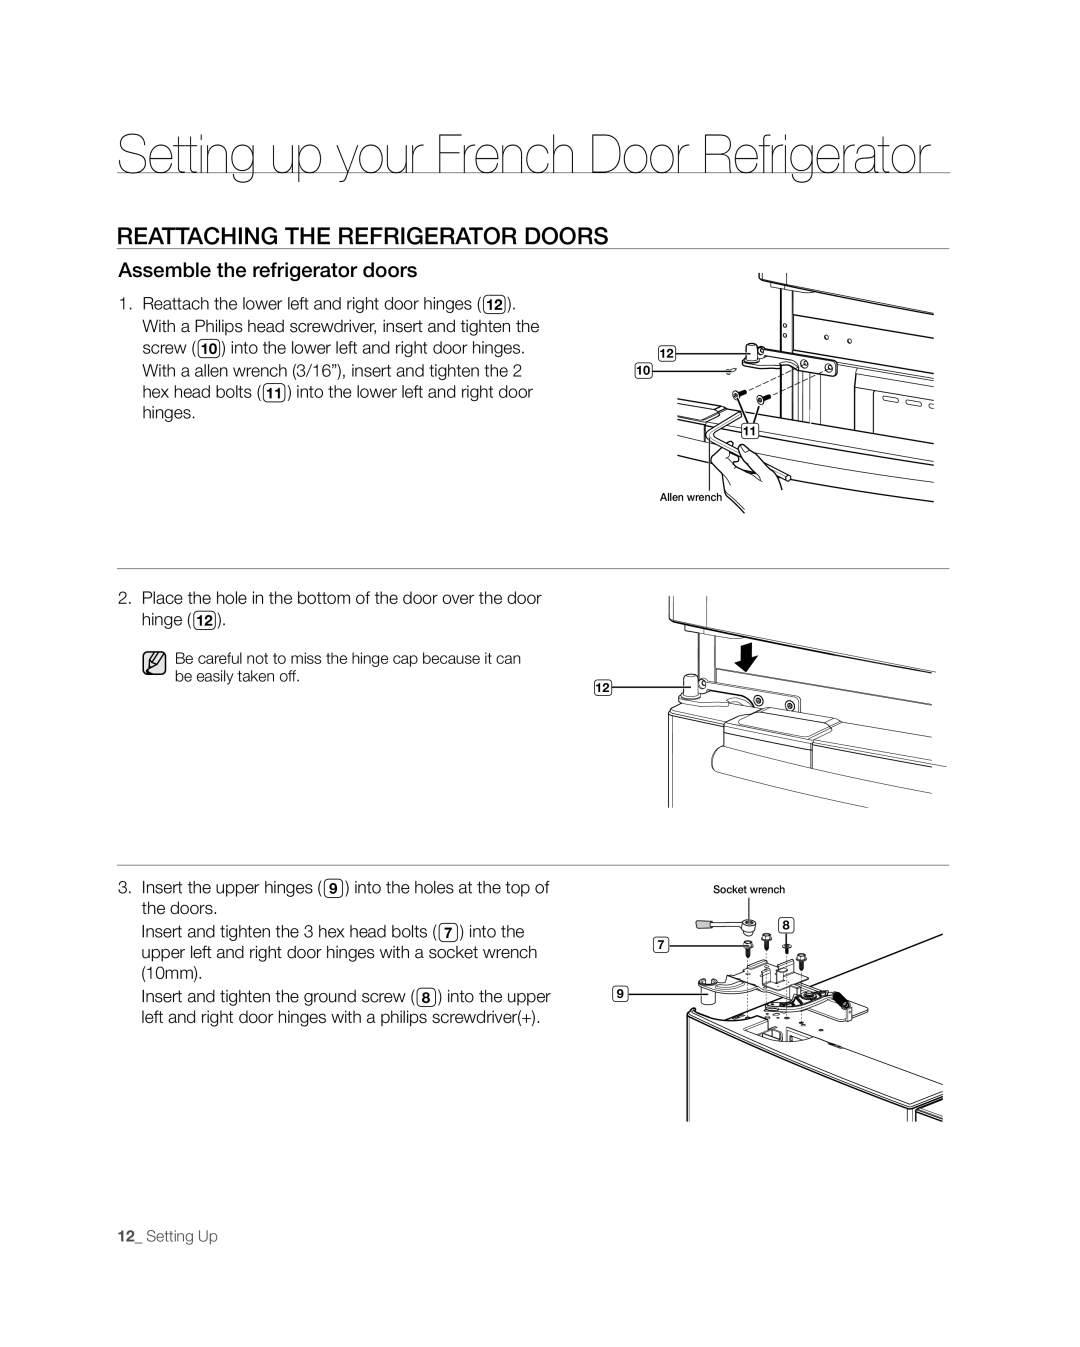 Samsung RFG238AARS, RFG237 user manual REAttACHinG tHE REFRiGERAtoR DooRs, Setting up your French Door Refrigerator 